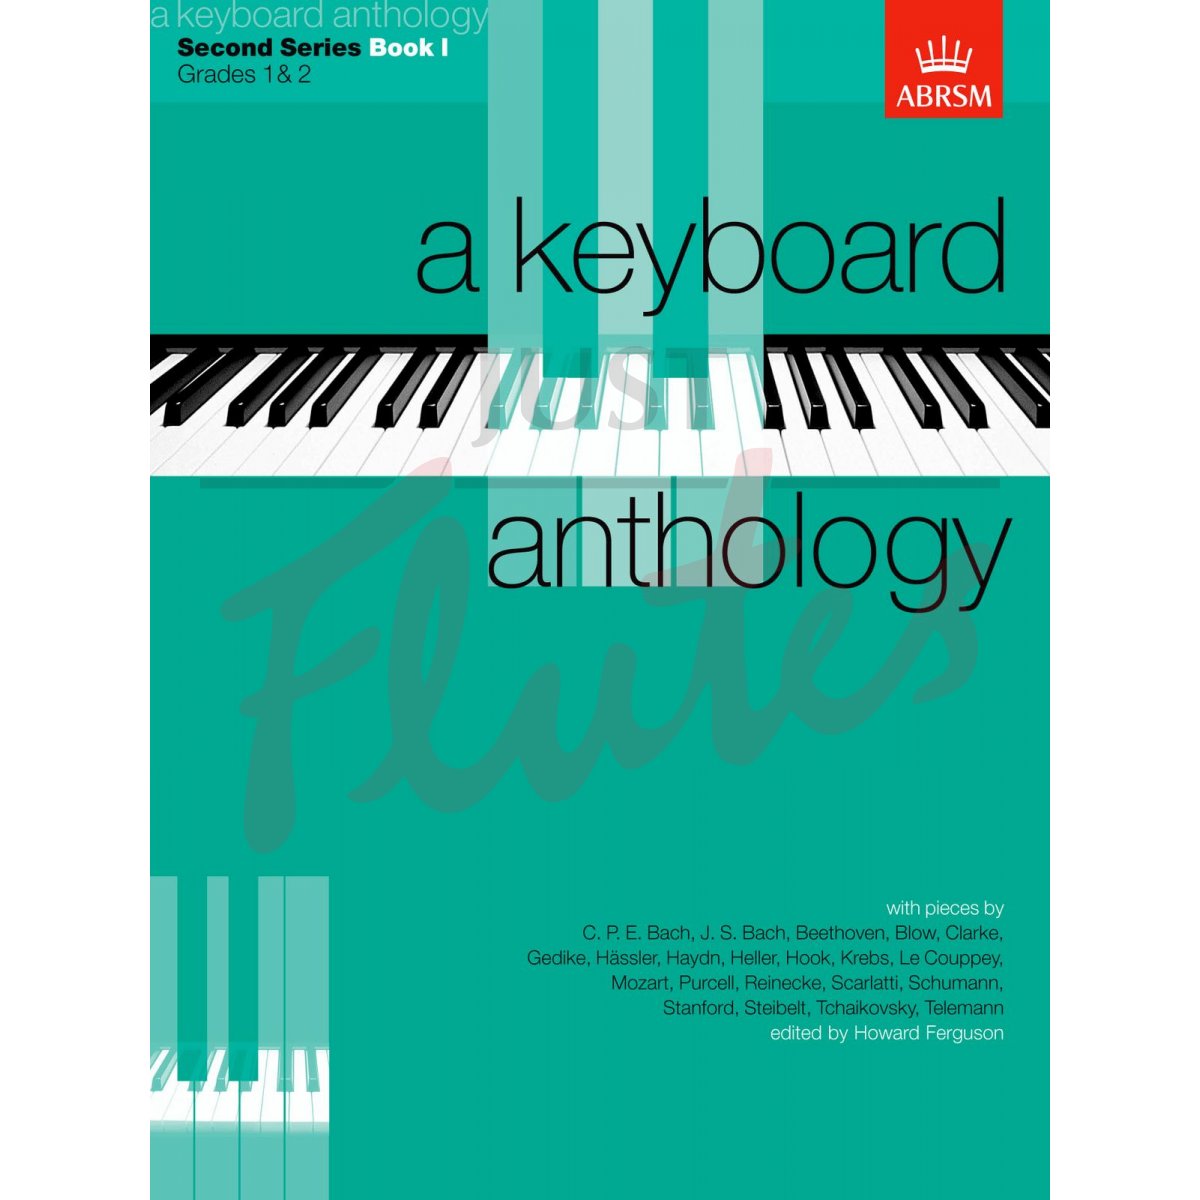 A Keyboard Anthology: Second Series Book 1